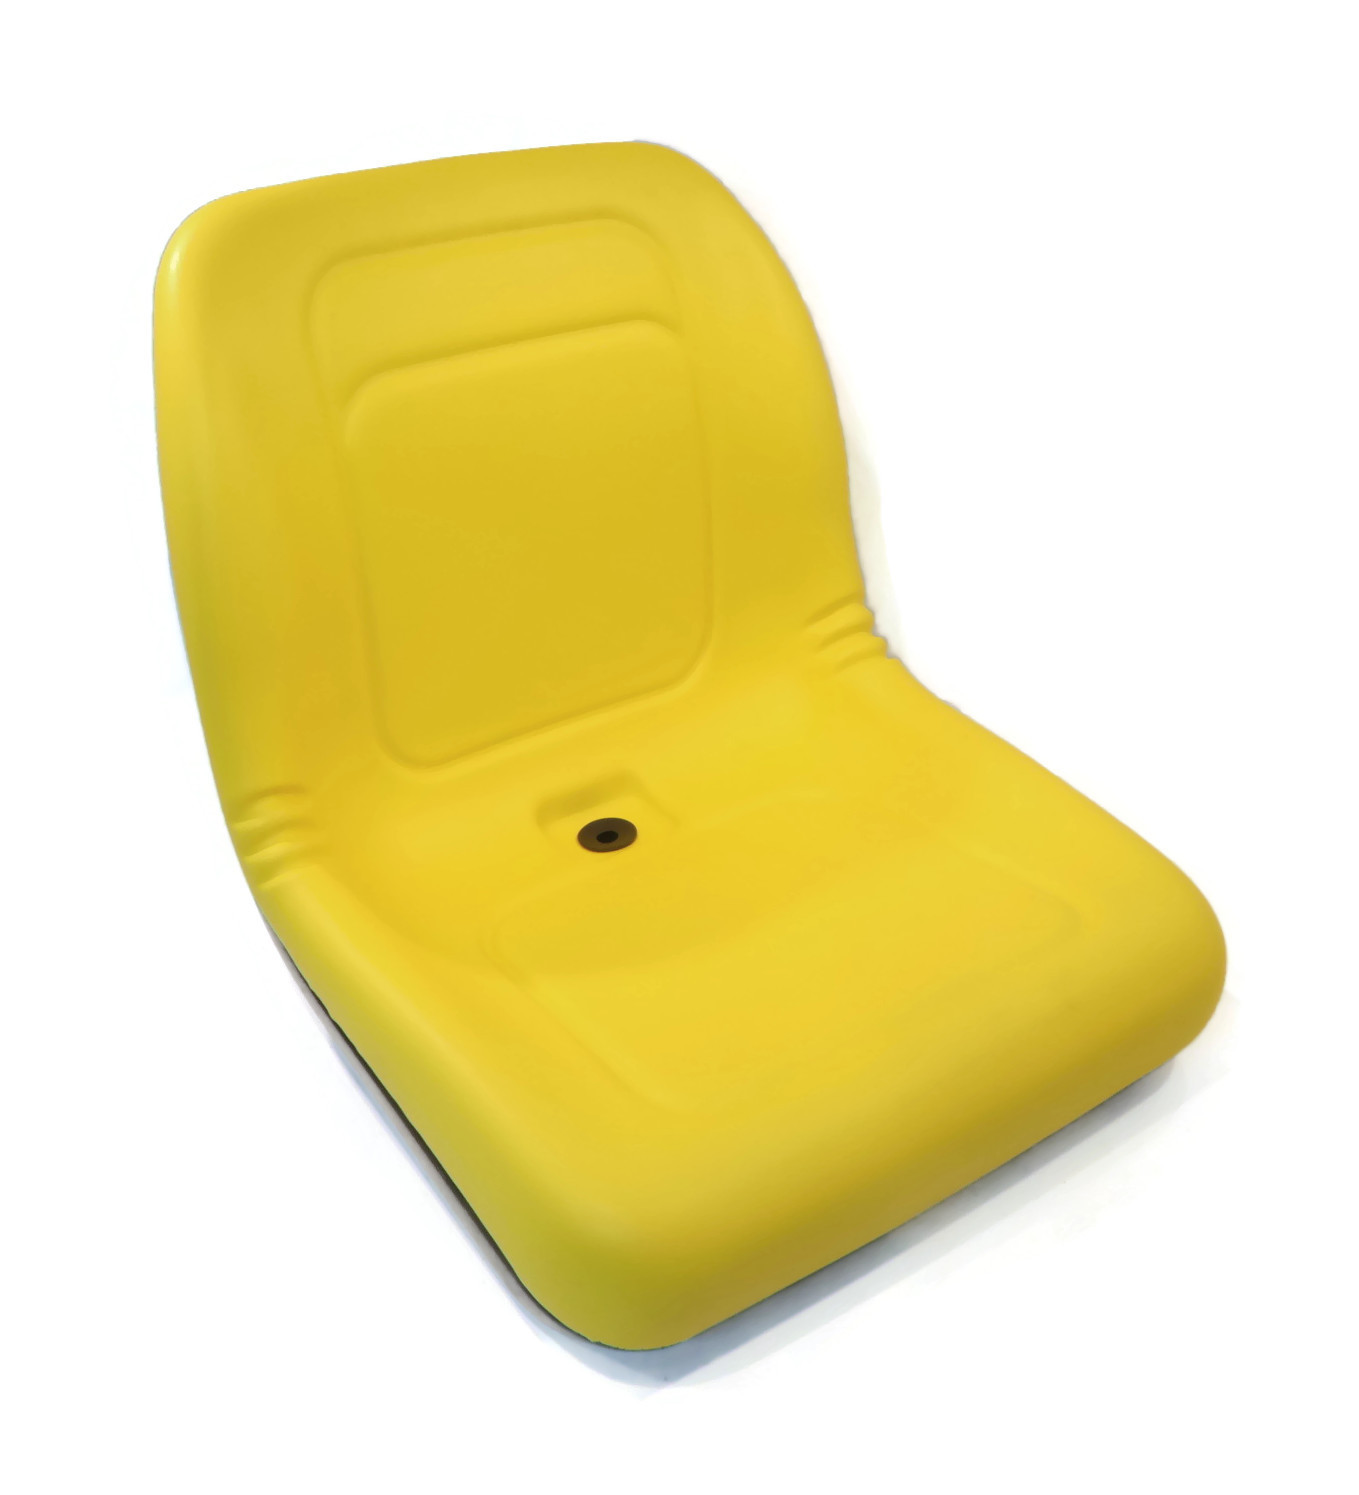 The ROP Shop | (2) Yellow High Back Seat For John Deere LVA10029 AM129969 AM129970 AM133476 - image 5 of 5